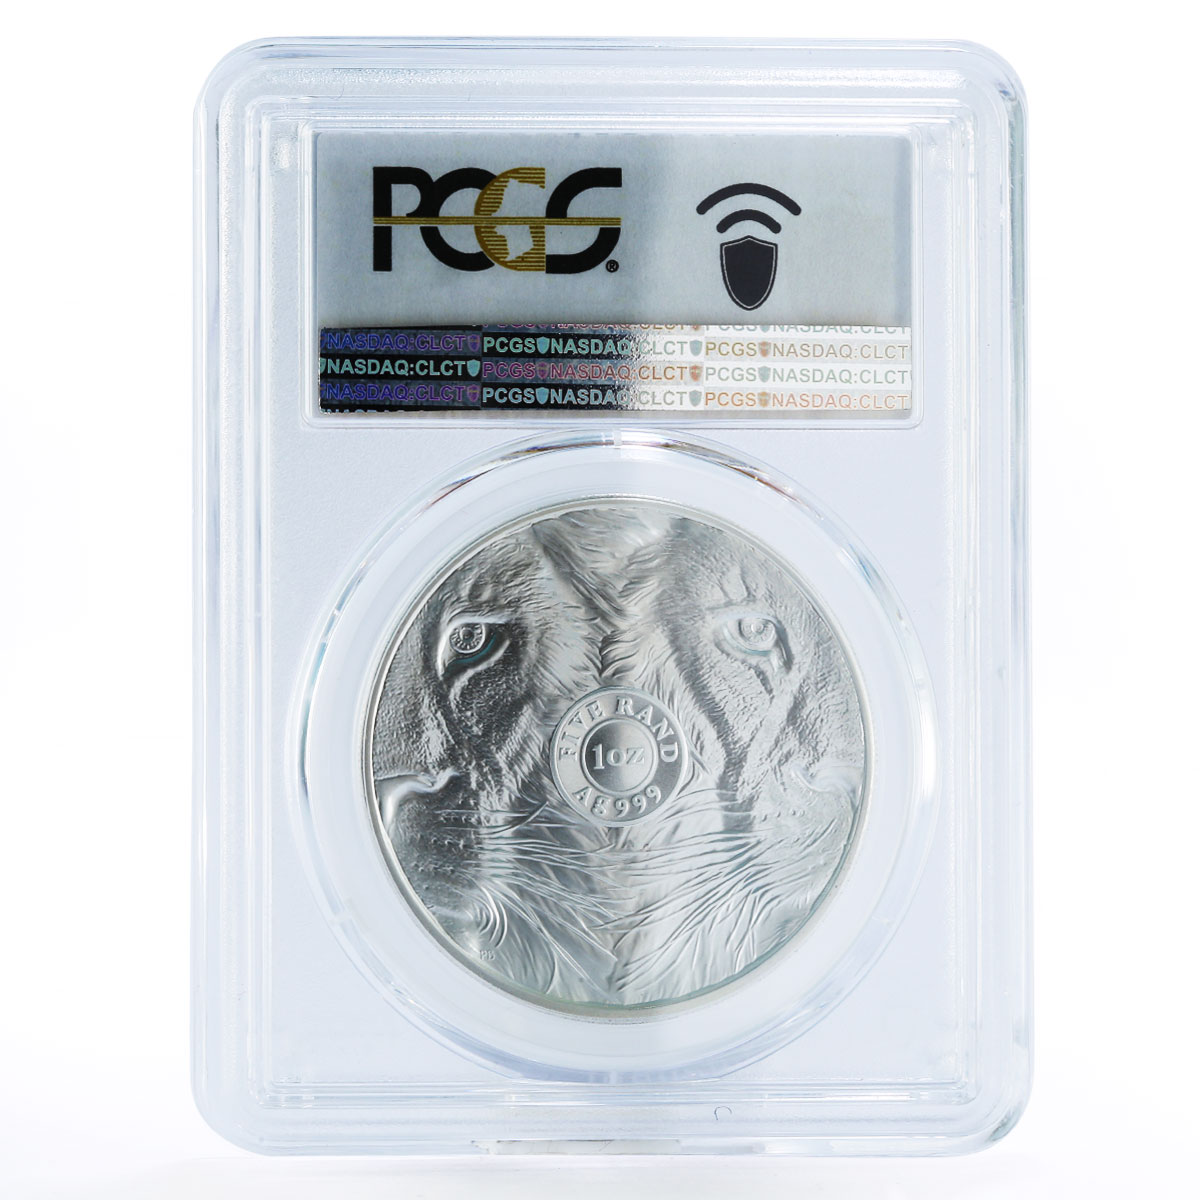 South Africa 5 rand The Big Five series The Lion MS69 PCGS silver coin 2019